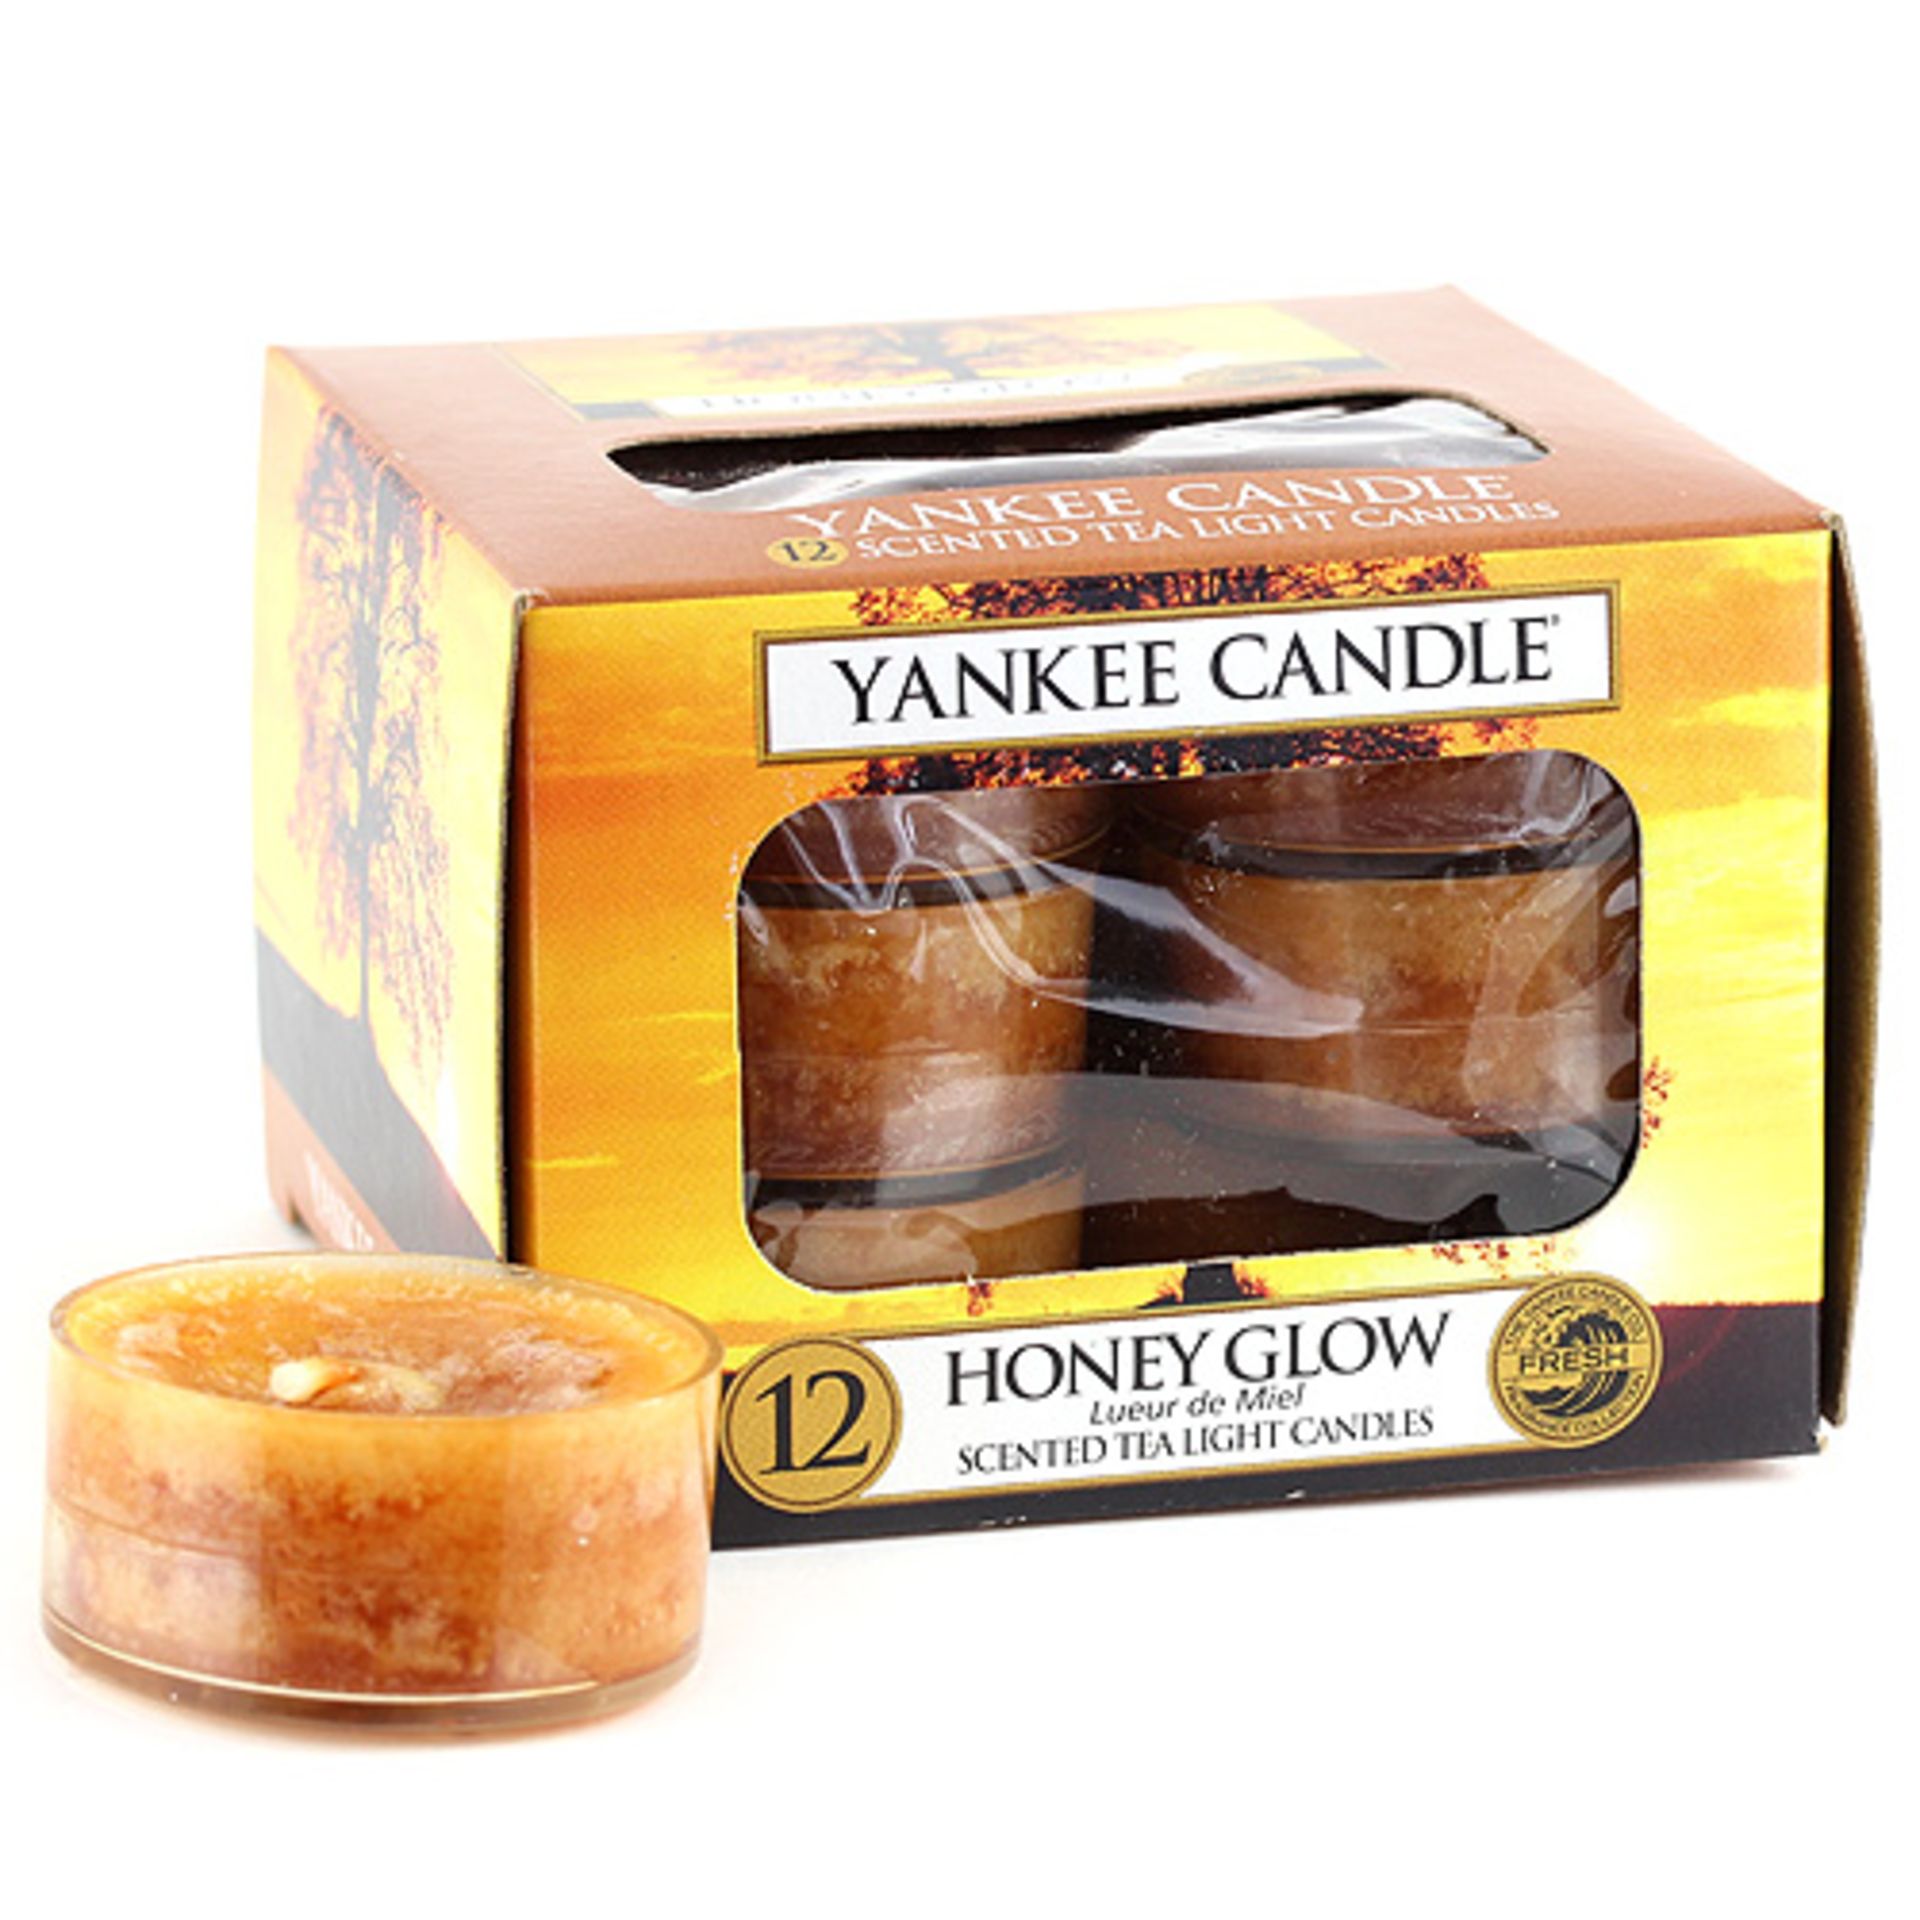 V Brand New 12 Yankee Candle Scented Tea Light Candles Honey Glow eBay Price £8.24 X 2 YOUR BID